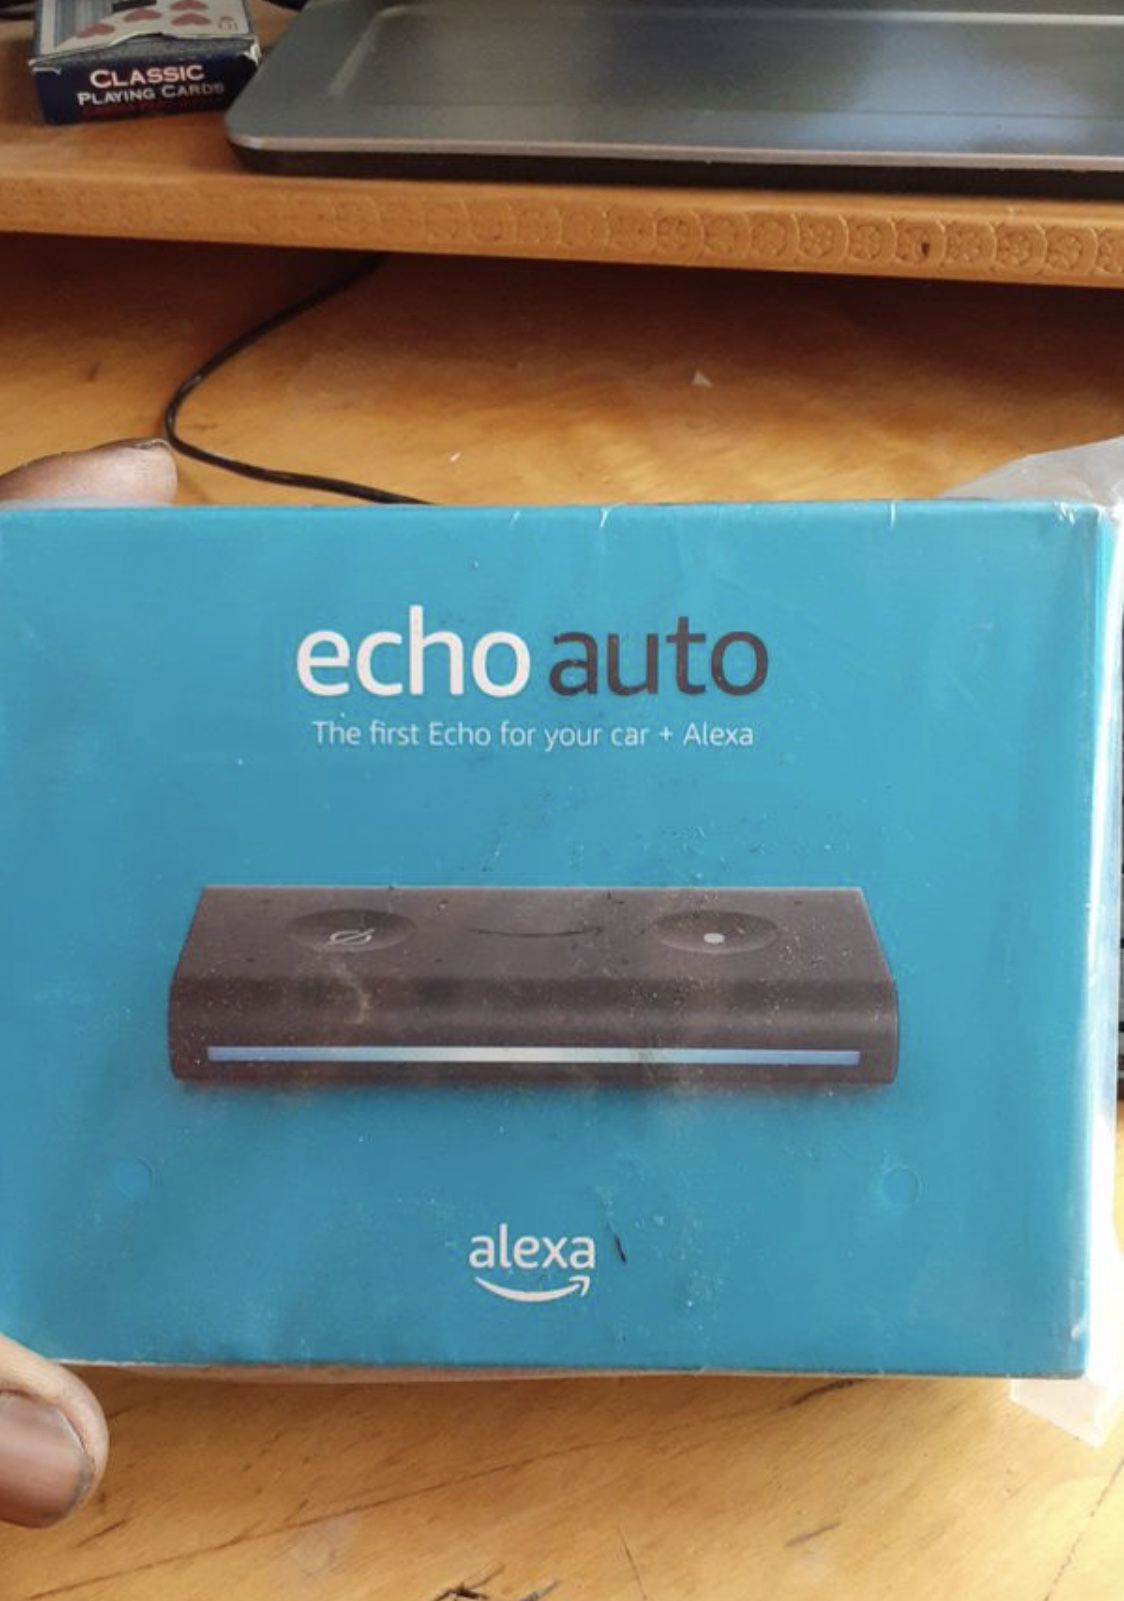 Echo Auto - Hands-free Alexa in your car with your phone